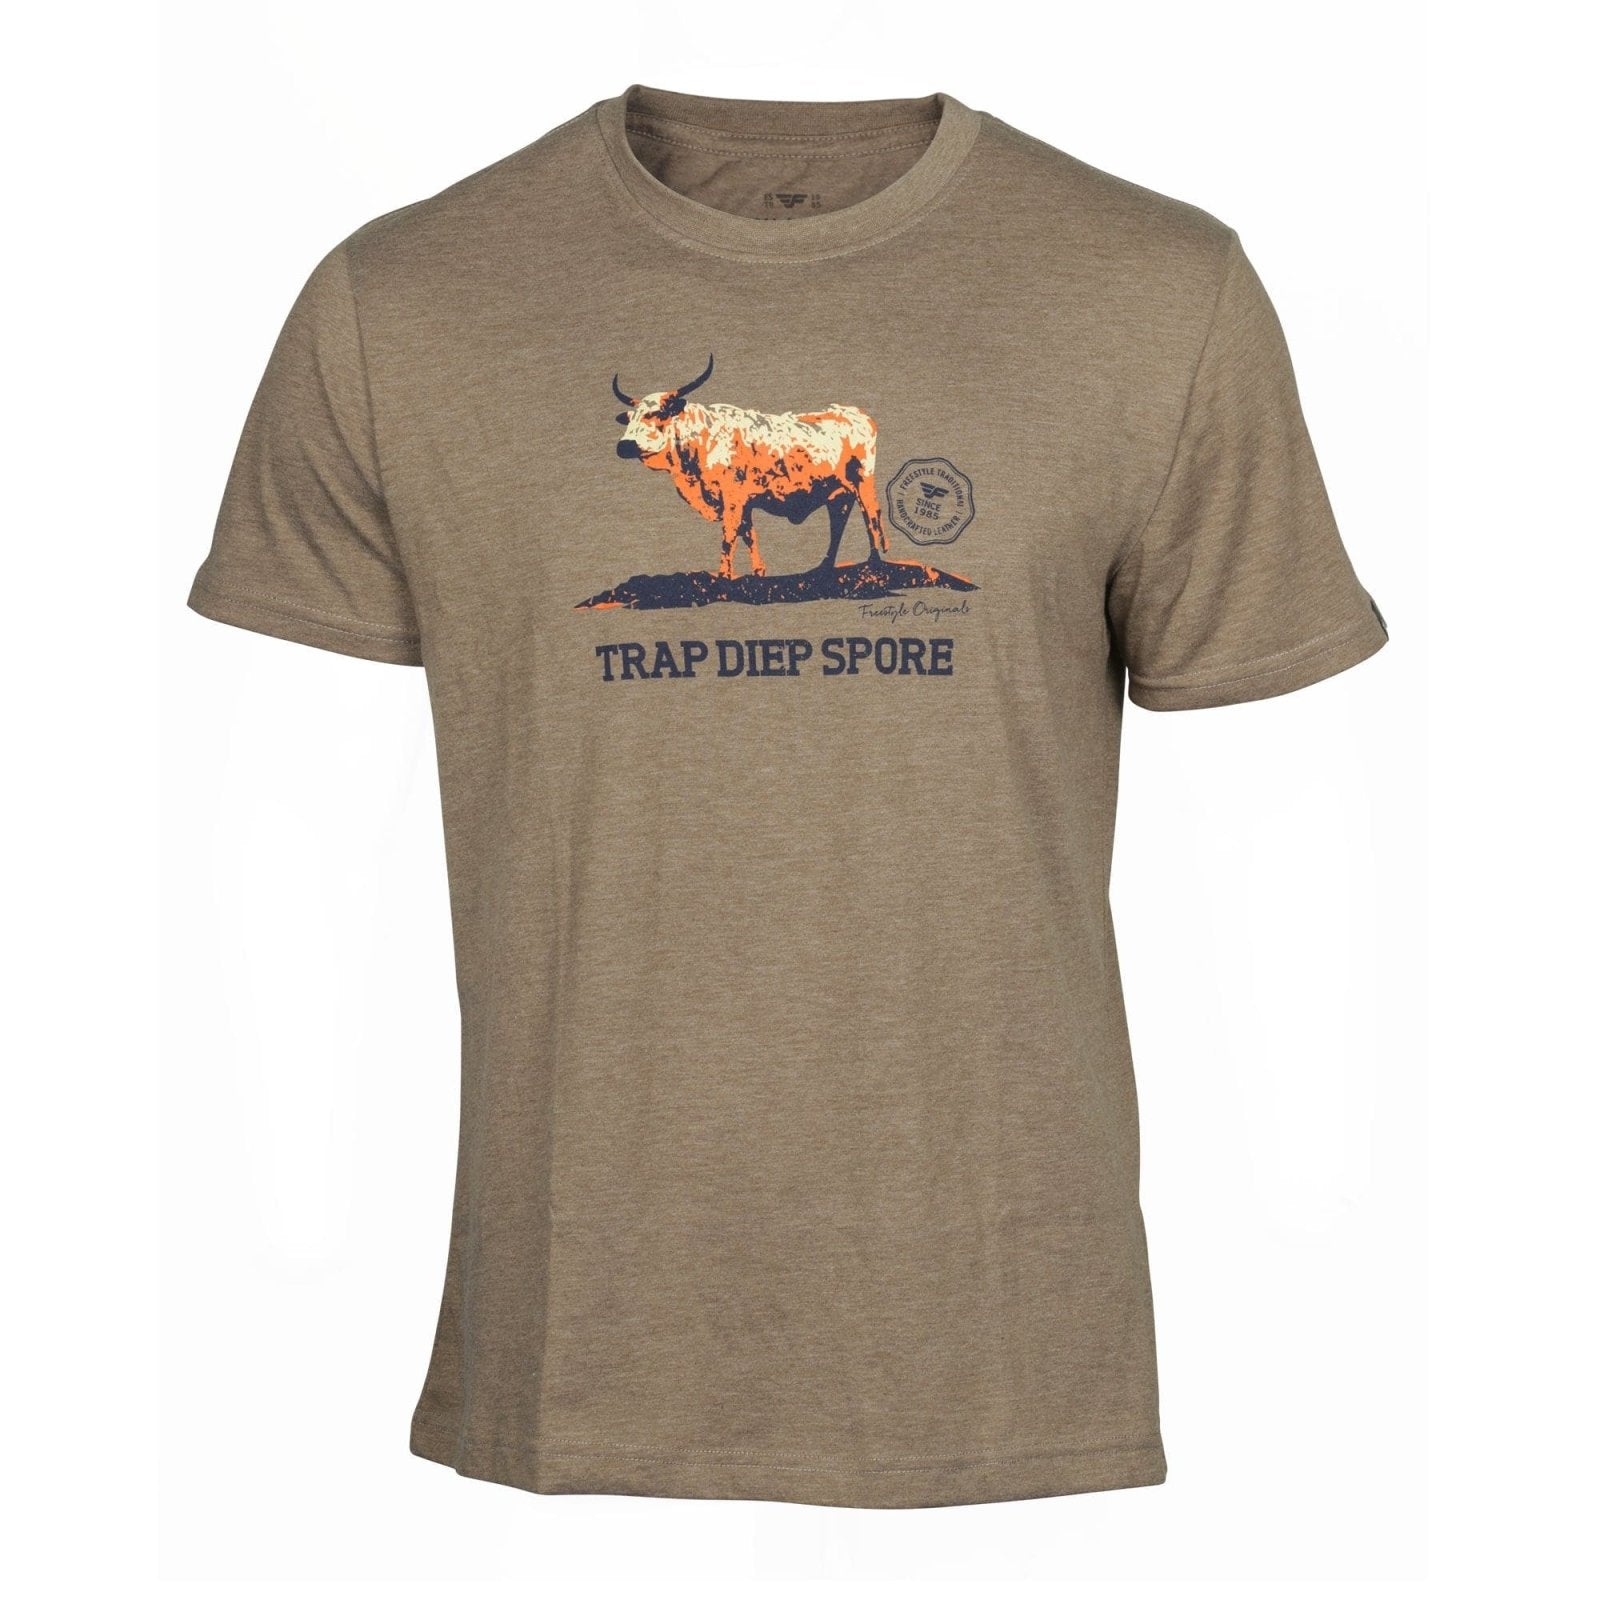 T-shirt Freestyle Brown Melange with Orange Nguni Bull Motif - Freestyle SA Proudly local leather boots veldskoens vellies leather shoes suede veldskoens